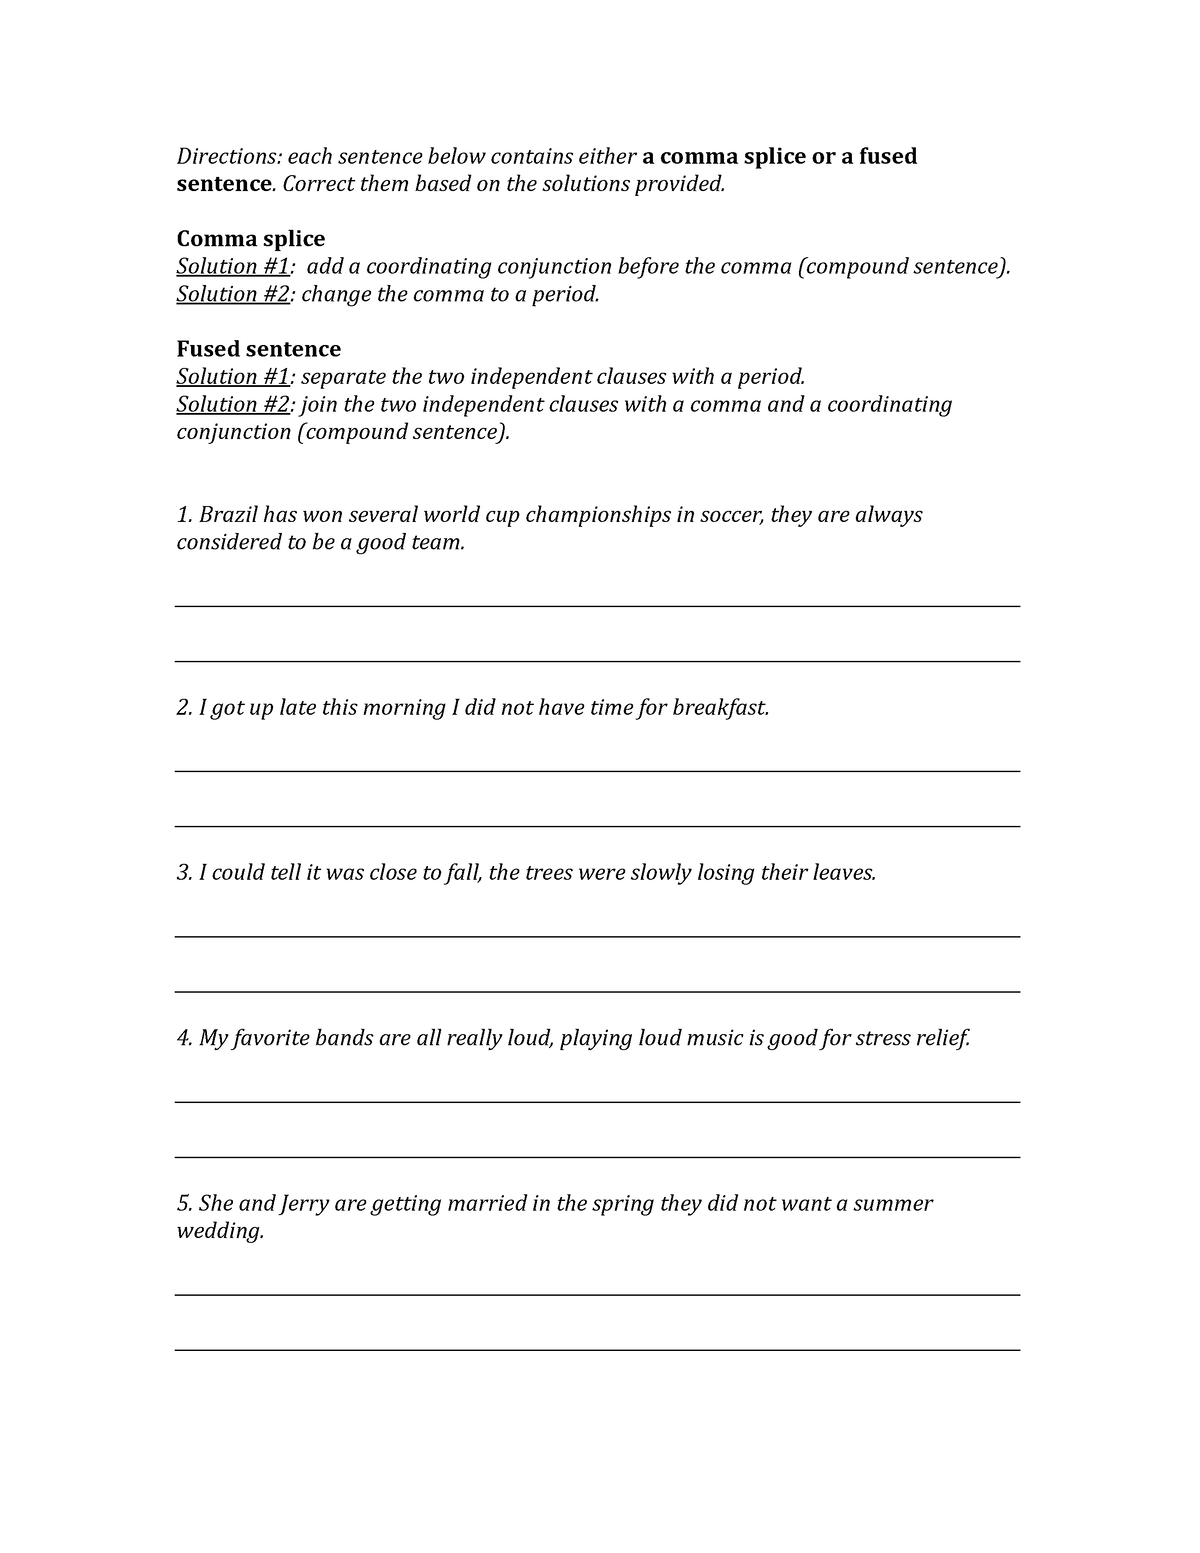 comma-splices-and-fused-sentences-worksheet-directions-each-sentence-below-contains-either-a